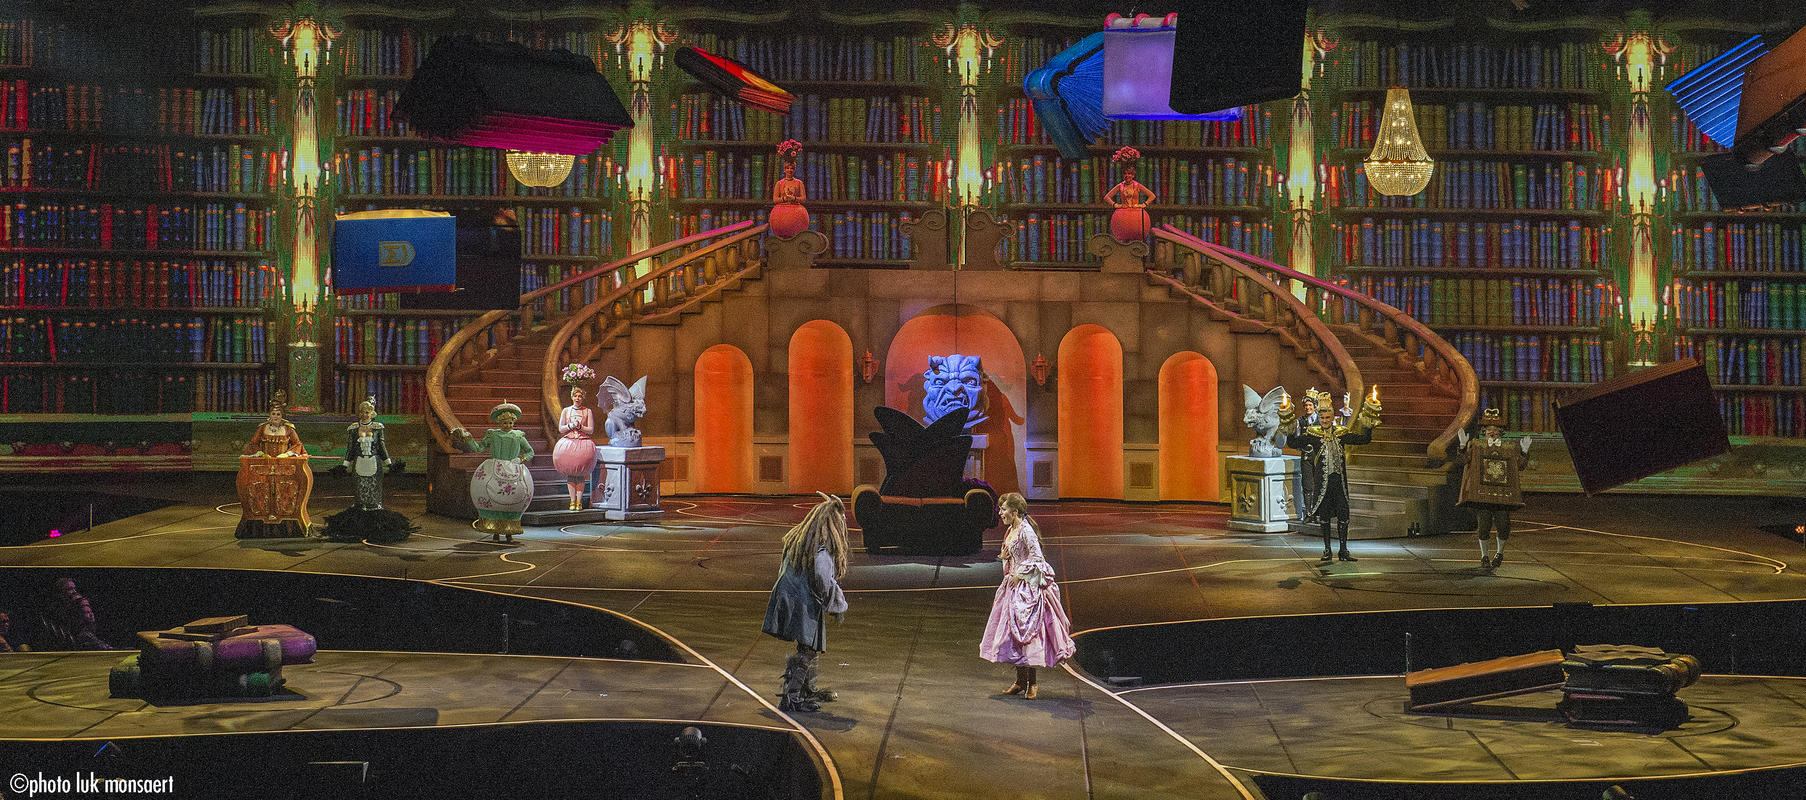 Photograph from Disney&#039;s Beauty and the Beast - lighting design by Luc Peumans